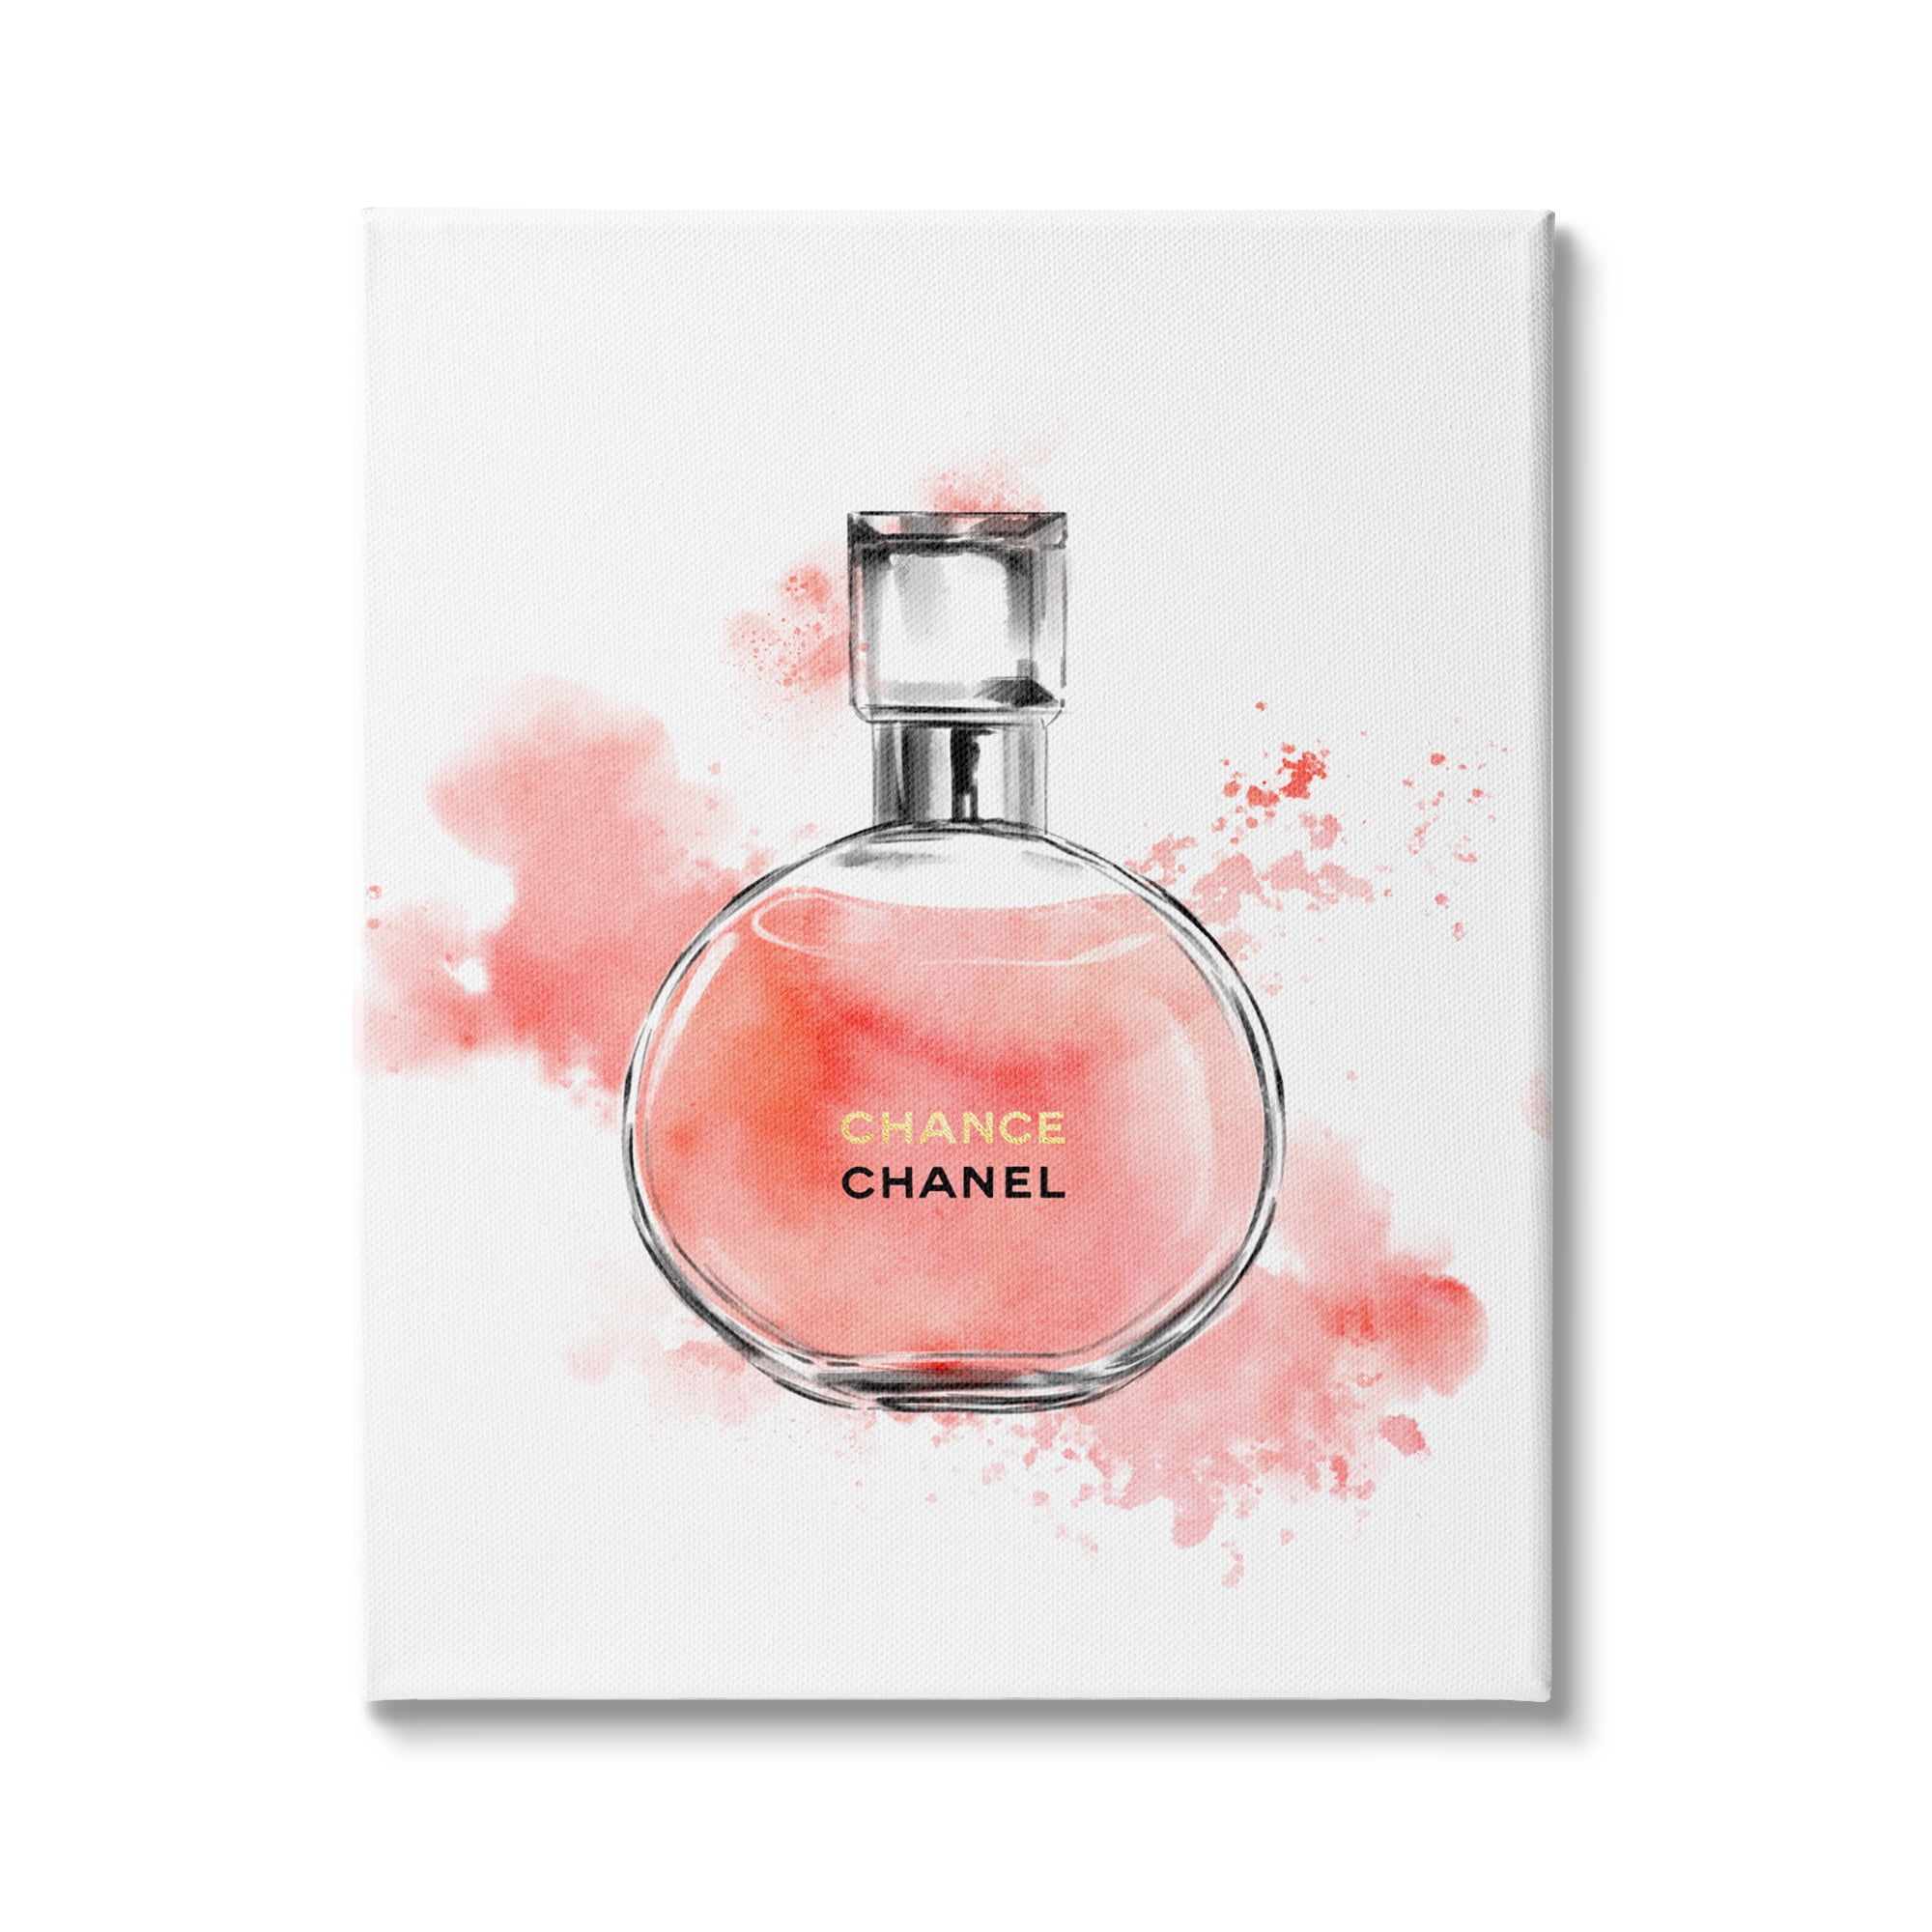 Pink Fashion Watercolor Cosmetic Perfume Bottle Designer Glam 24 in x 30 in Painting Canvas Art Print, by Stupell Home dcor